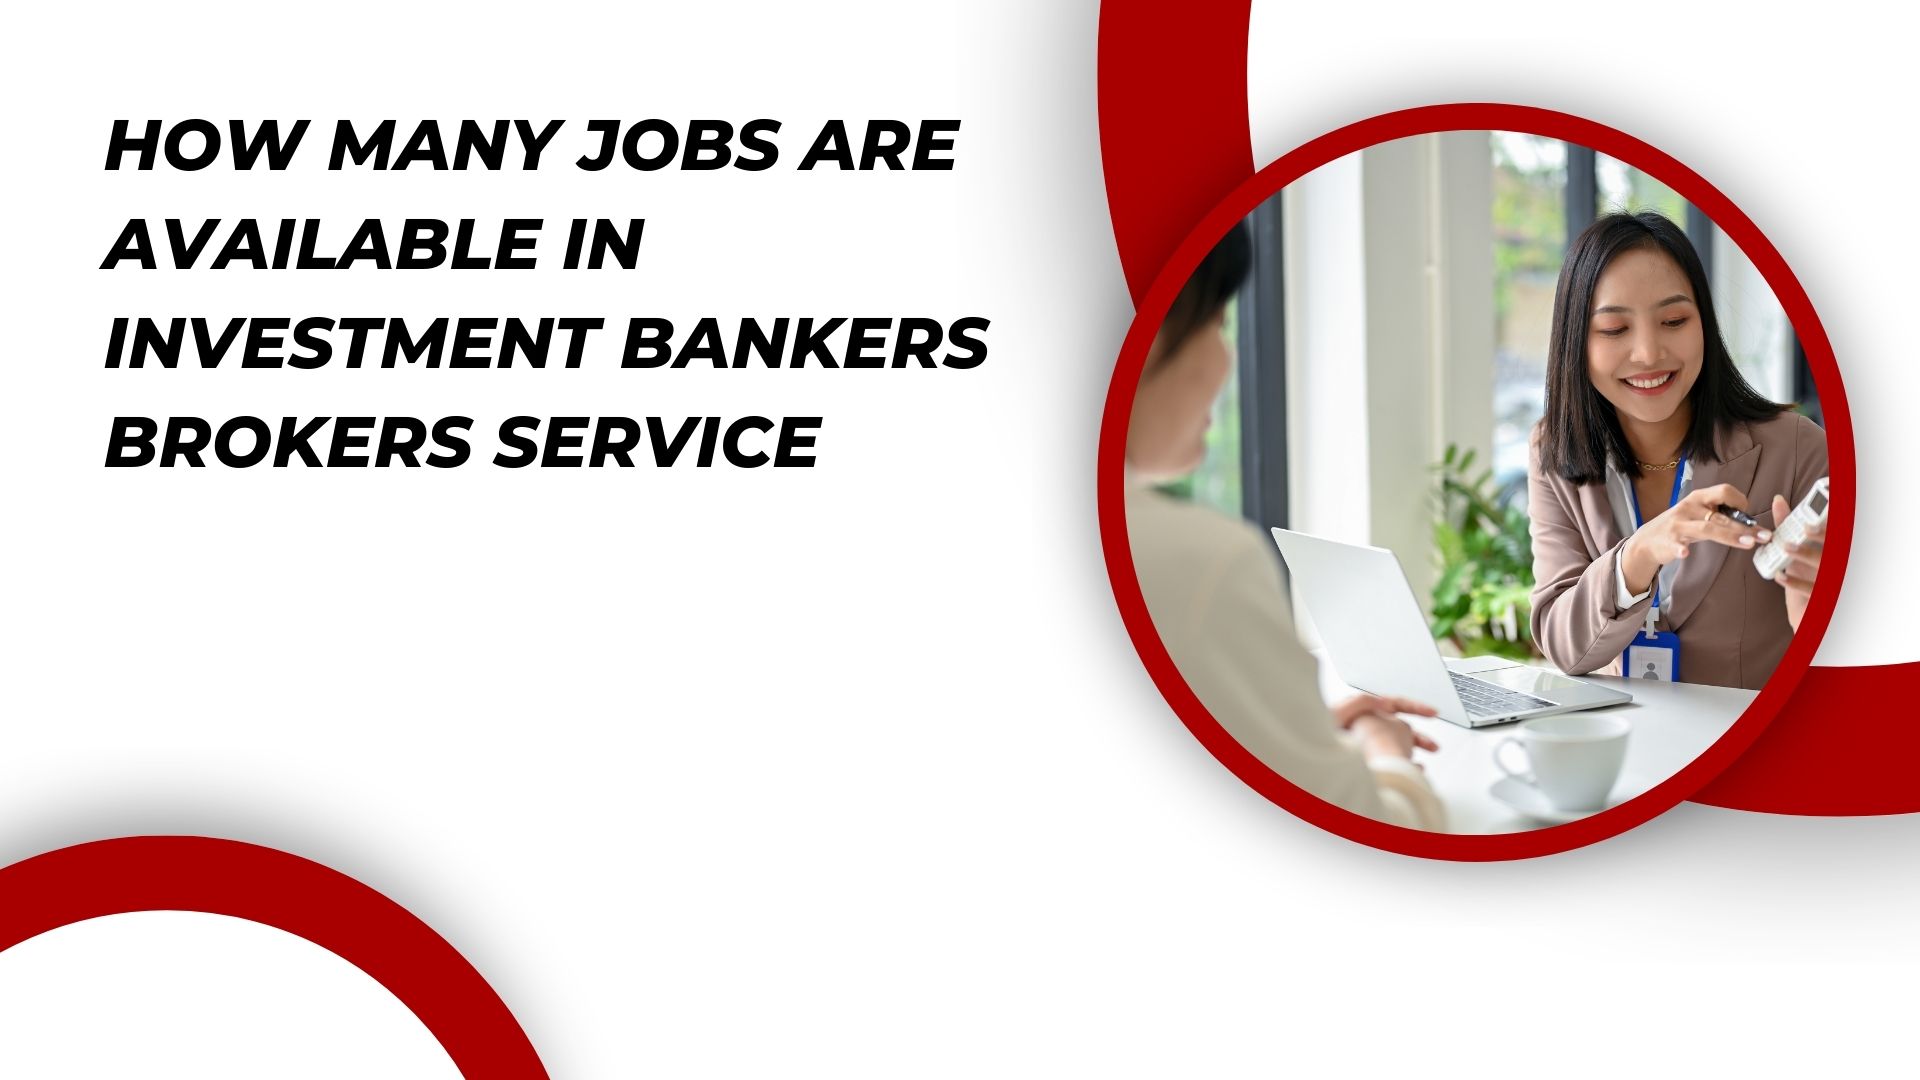 How Many Jobs are Available in Investment Bankers Brokers Service